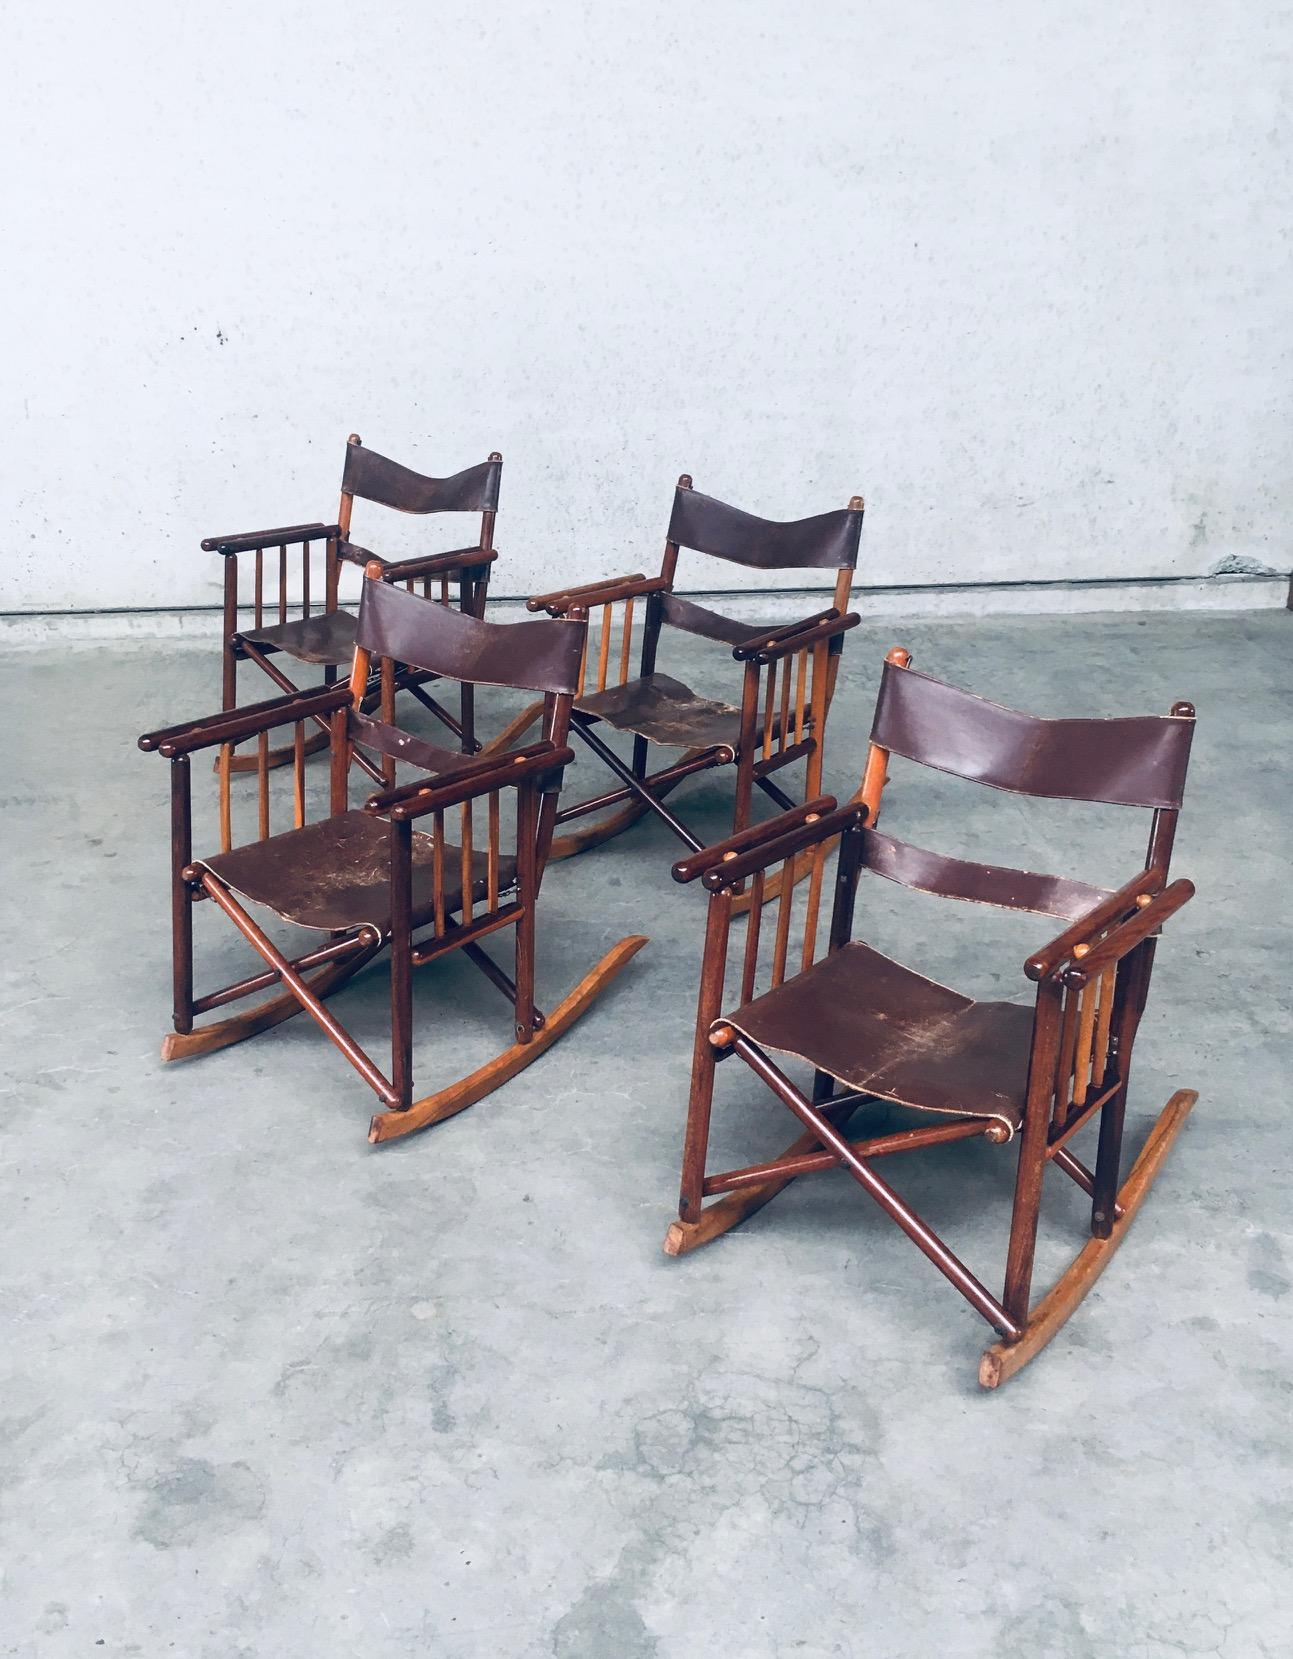 Vintage Original Midcentury Costa Rican Folding Safari Campaign rocking chair set of 4. Made in Costa Rica, 1950's / 60's. Exotic hardwood constructed frame with brown leather straps for back support and brown leather seat. the chairs have been well